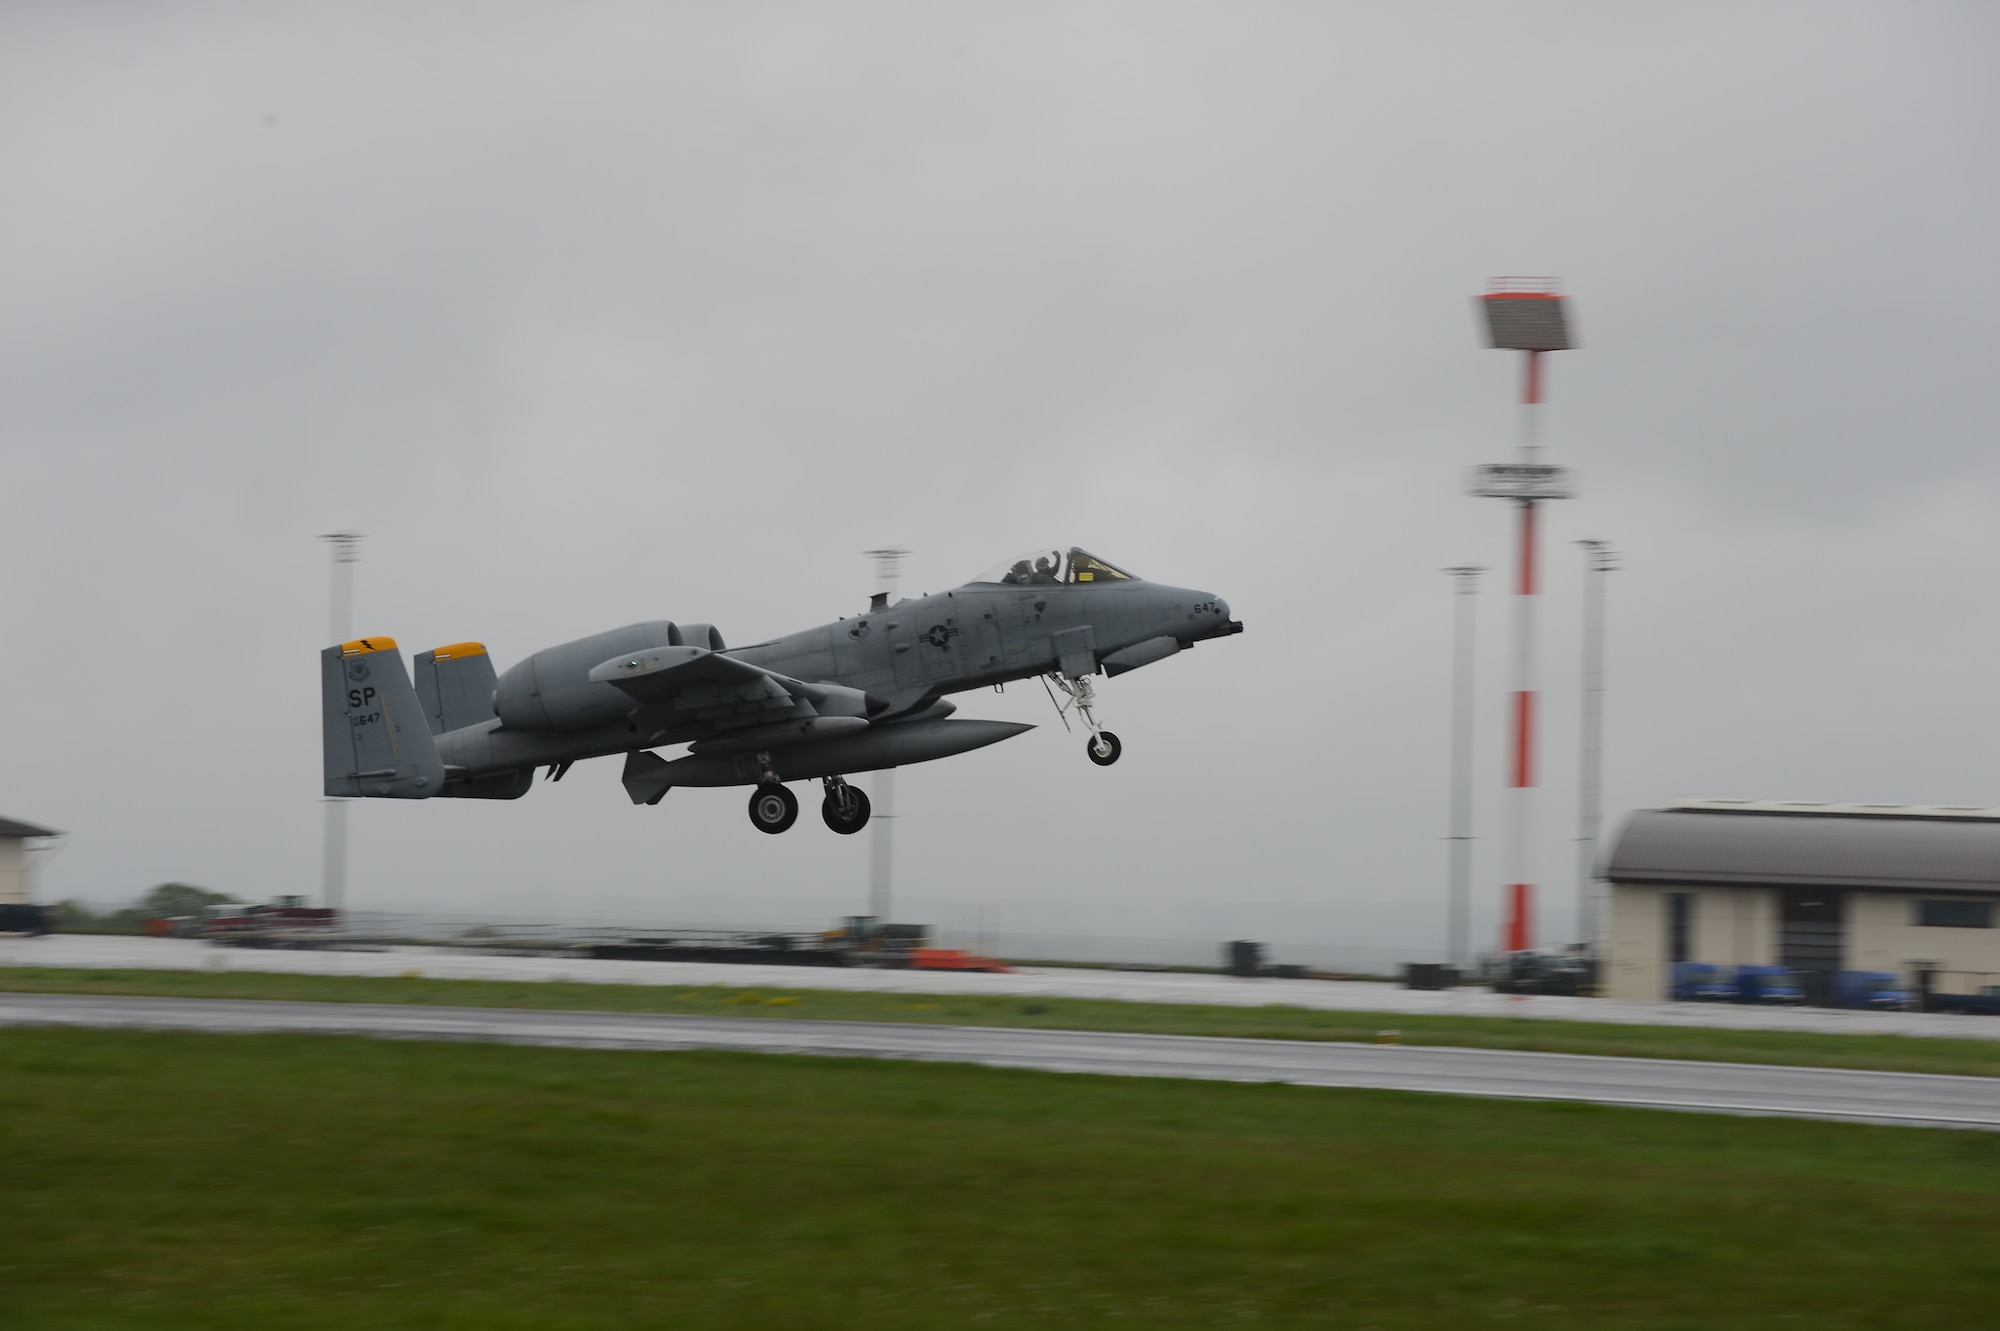 SPANGDAHLEM AIR BASE, Germany – A U.S. Air Force A-10 Thunderbolt II attack aircraft assigned to the 81st Fighter Squadron takes off for the final time from Spangdahlem Air Base May 17, 2013. A total of 21 aircraft relocated to several bases in the United States. (U.S. Air Force photo by Tech. Sgt. Jonathan Pomeroy/Released)